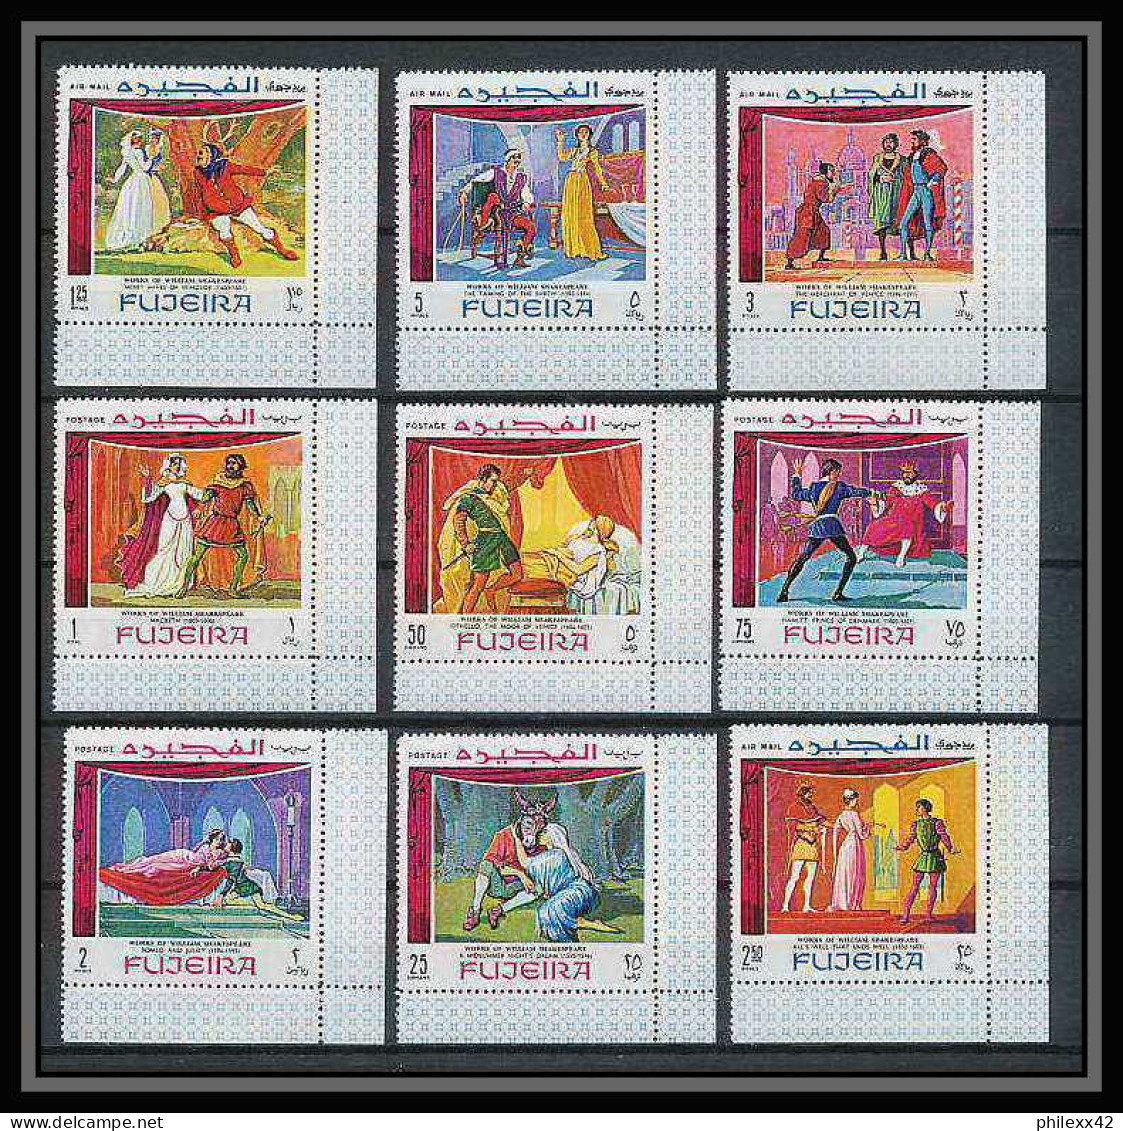 036 - Fujeira - Mi N°311/319 A Scenes From Shakespeare Theatre Coin De Feuille MNH ** - Theater